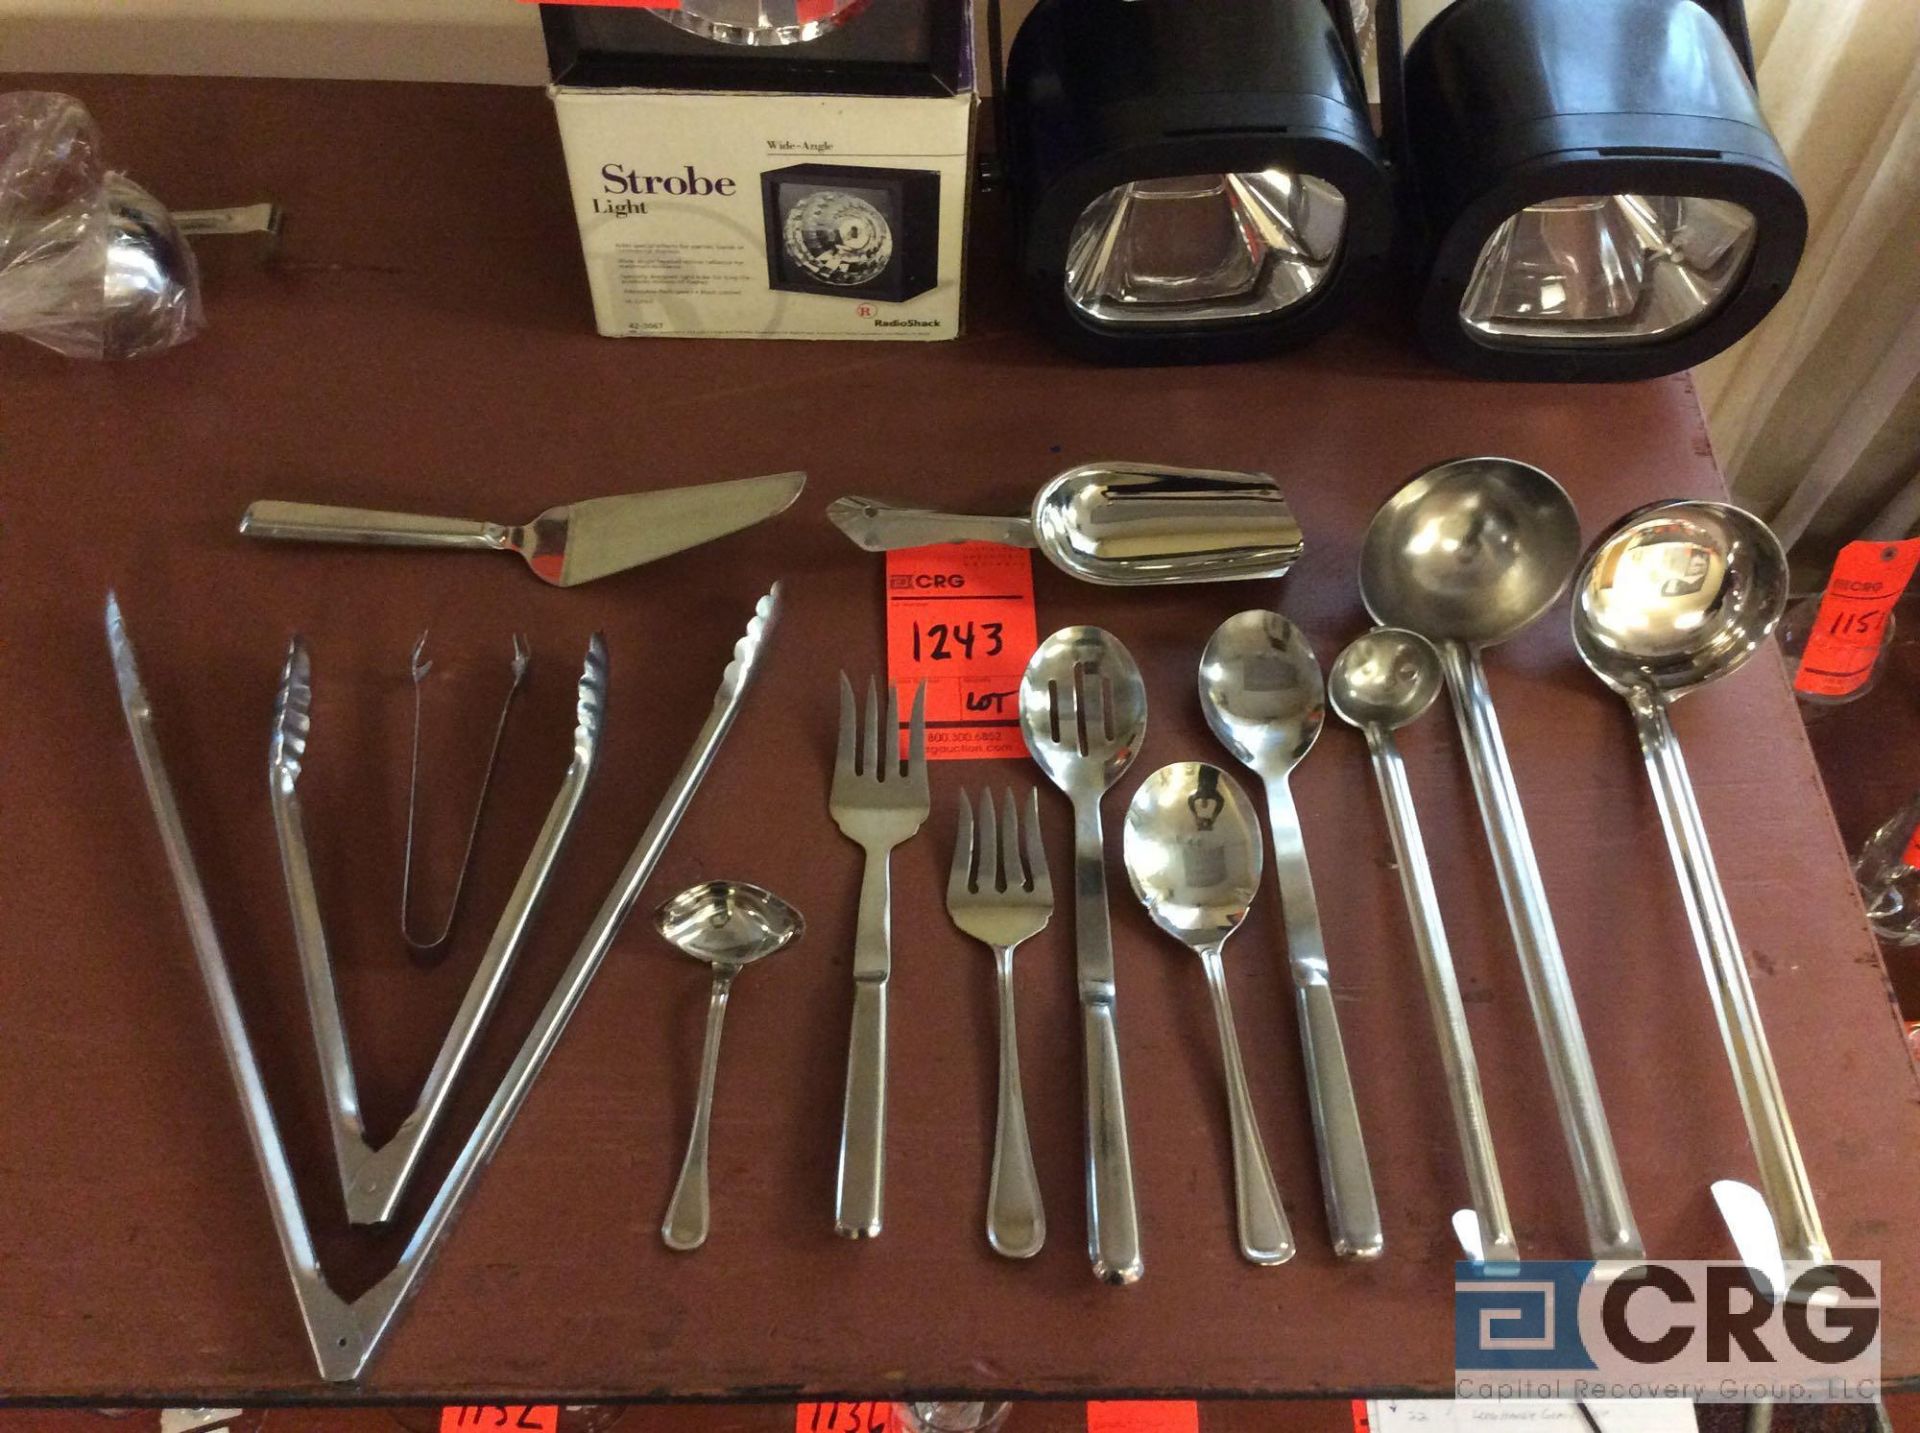 Lot of stainless steel serving pieces including (30) gravy ladles, (22) long handle gravy ladles, (